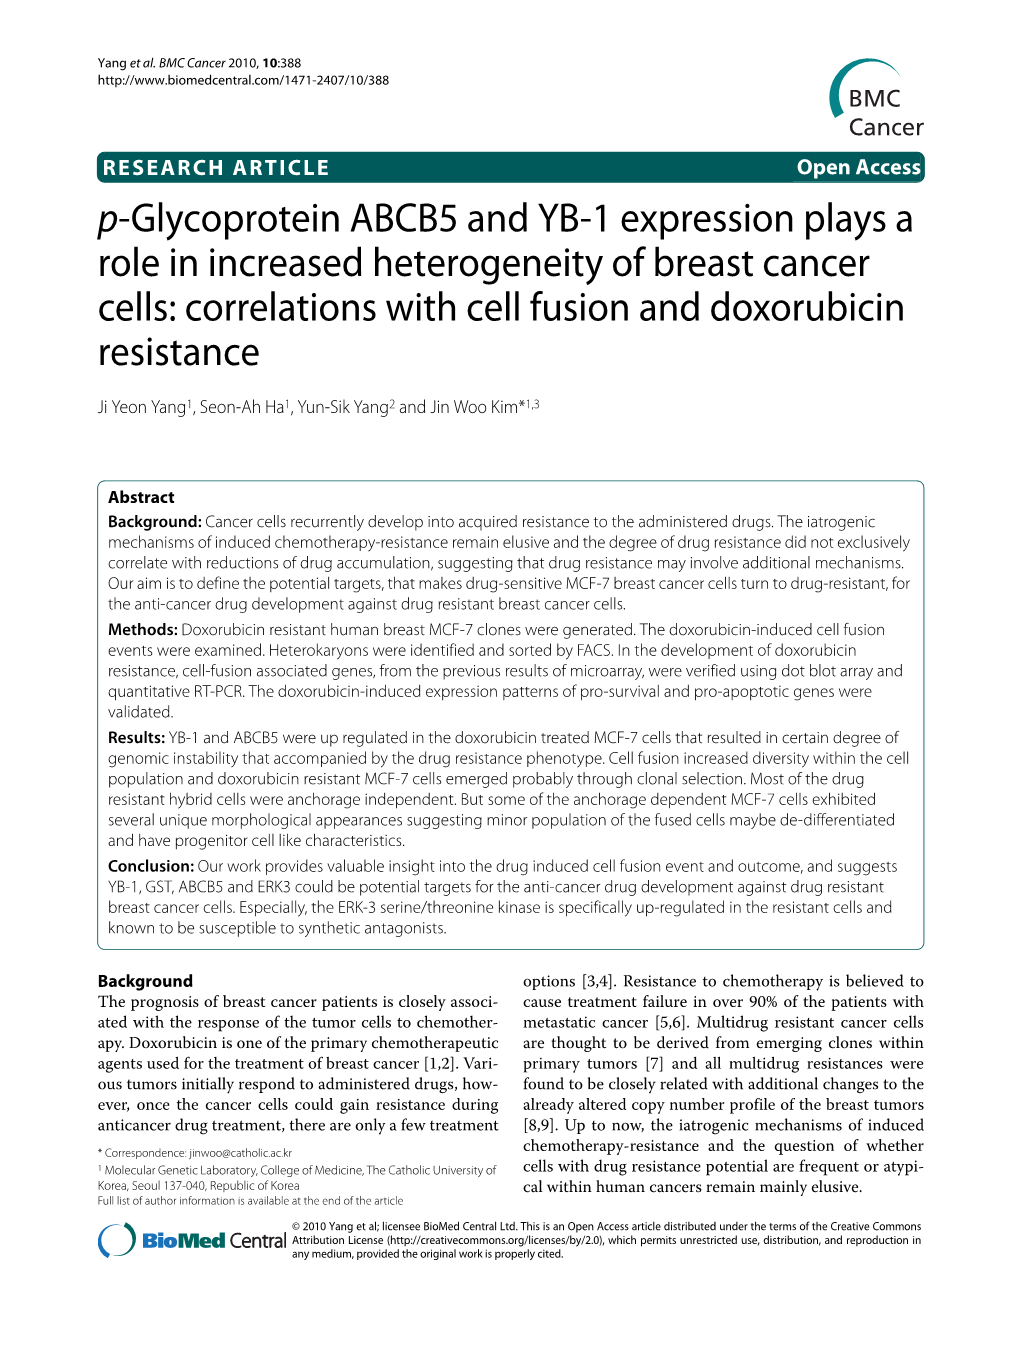 P-Glycoprotein ABCB5 and YB-1 Expression Plays A